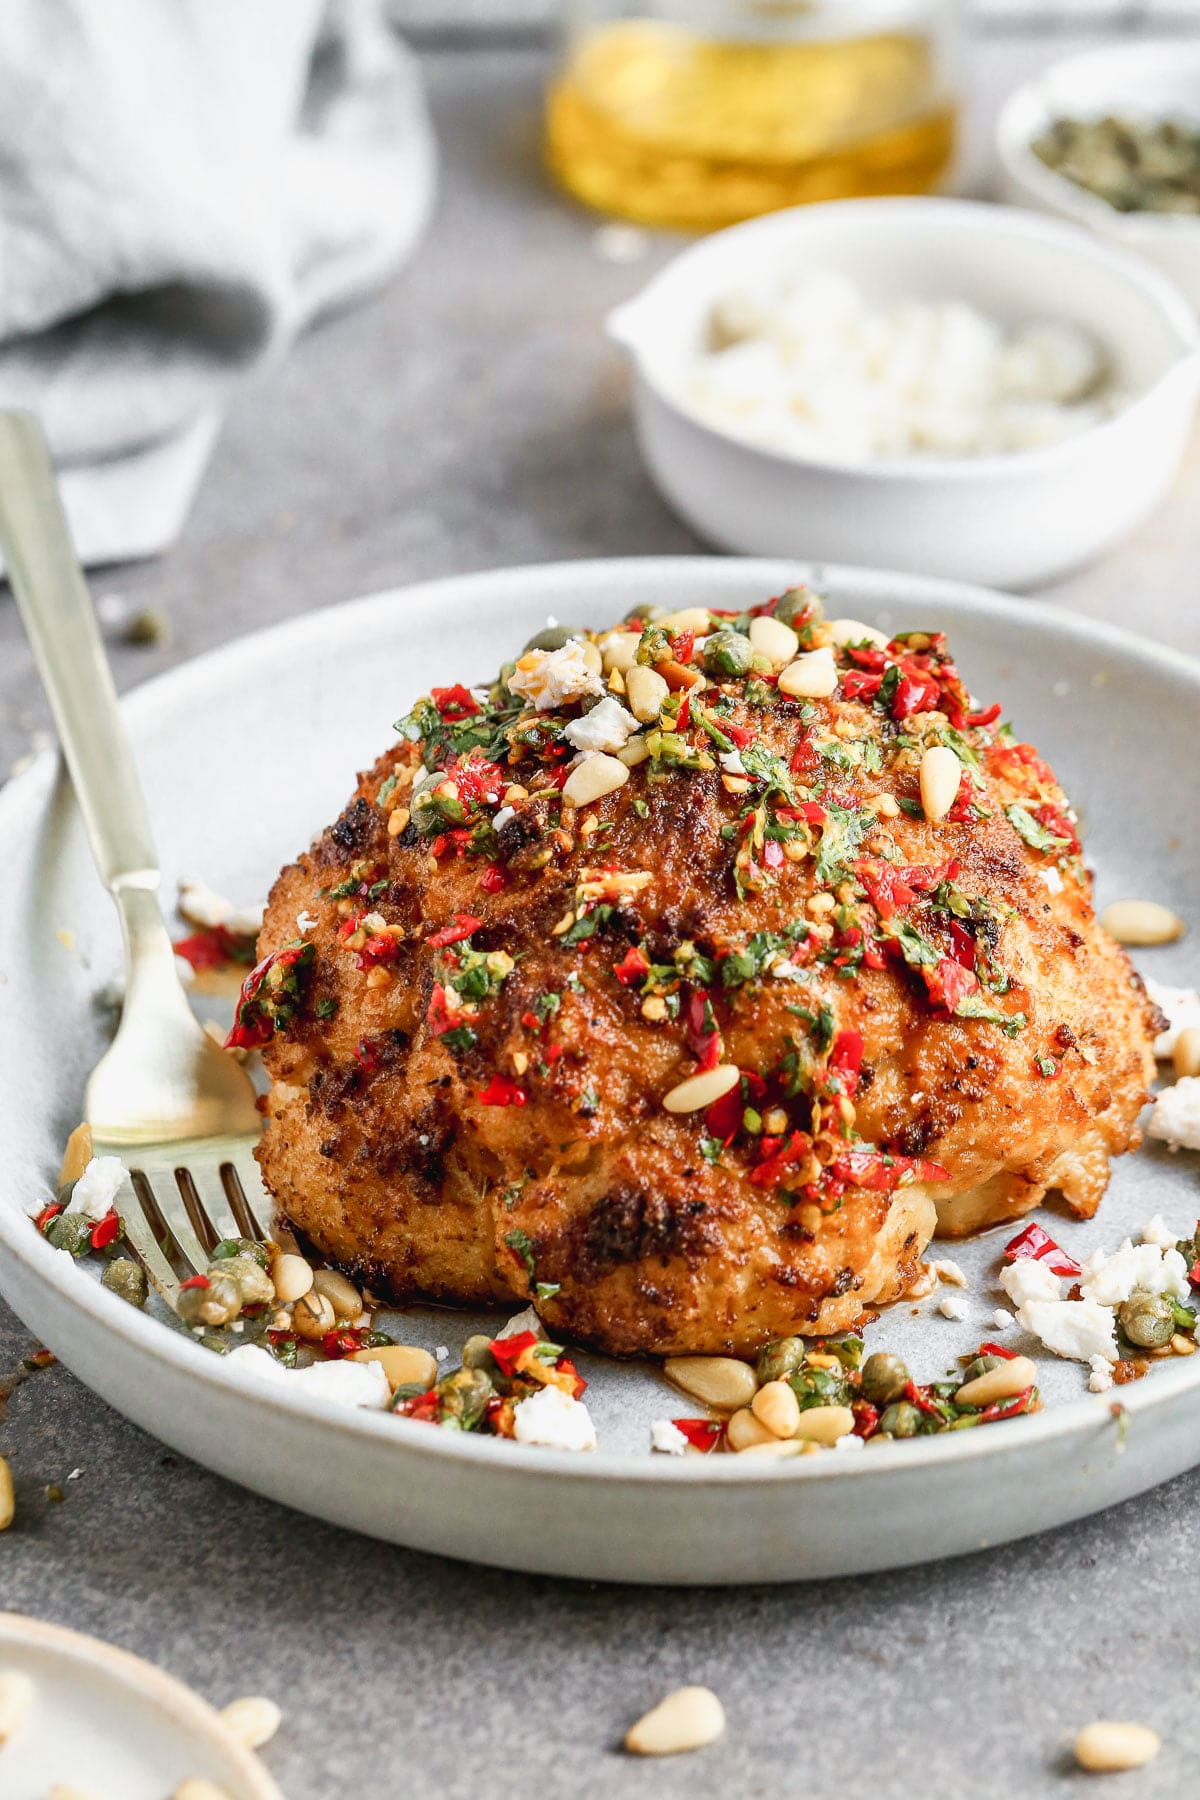 Visually beautiful and even tastier to eat, our Whole Roasted Cauliflower is THE vegetable recipe worthy of a permanent place in your dinner rotation. We steam a whole head of cauliflower, rub with with spices and then roast until it's tender on the inside and ultra crispy on top. &nbsp;We cover it in an easy Calabrian Chili Chimichurri, sprinkle with toasted pine nuts, and finish it off with salty feta cheese. Eat a whole one for a meal or share with others as a side dish.